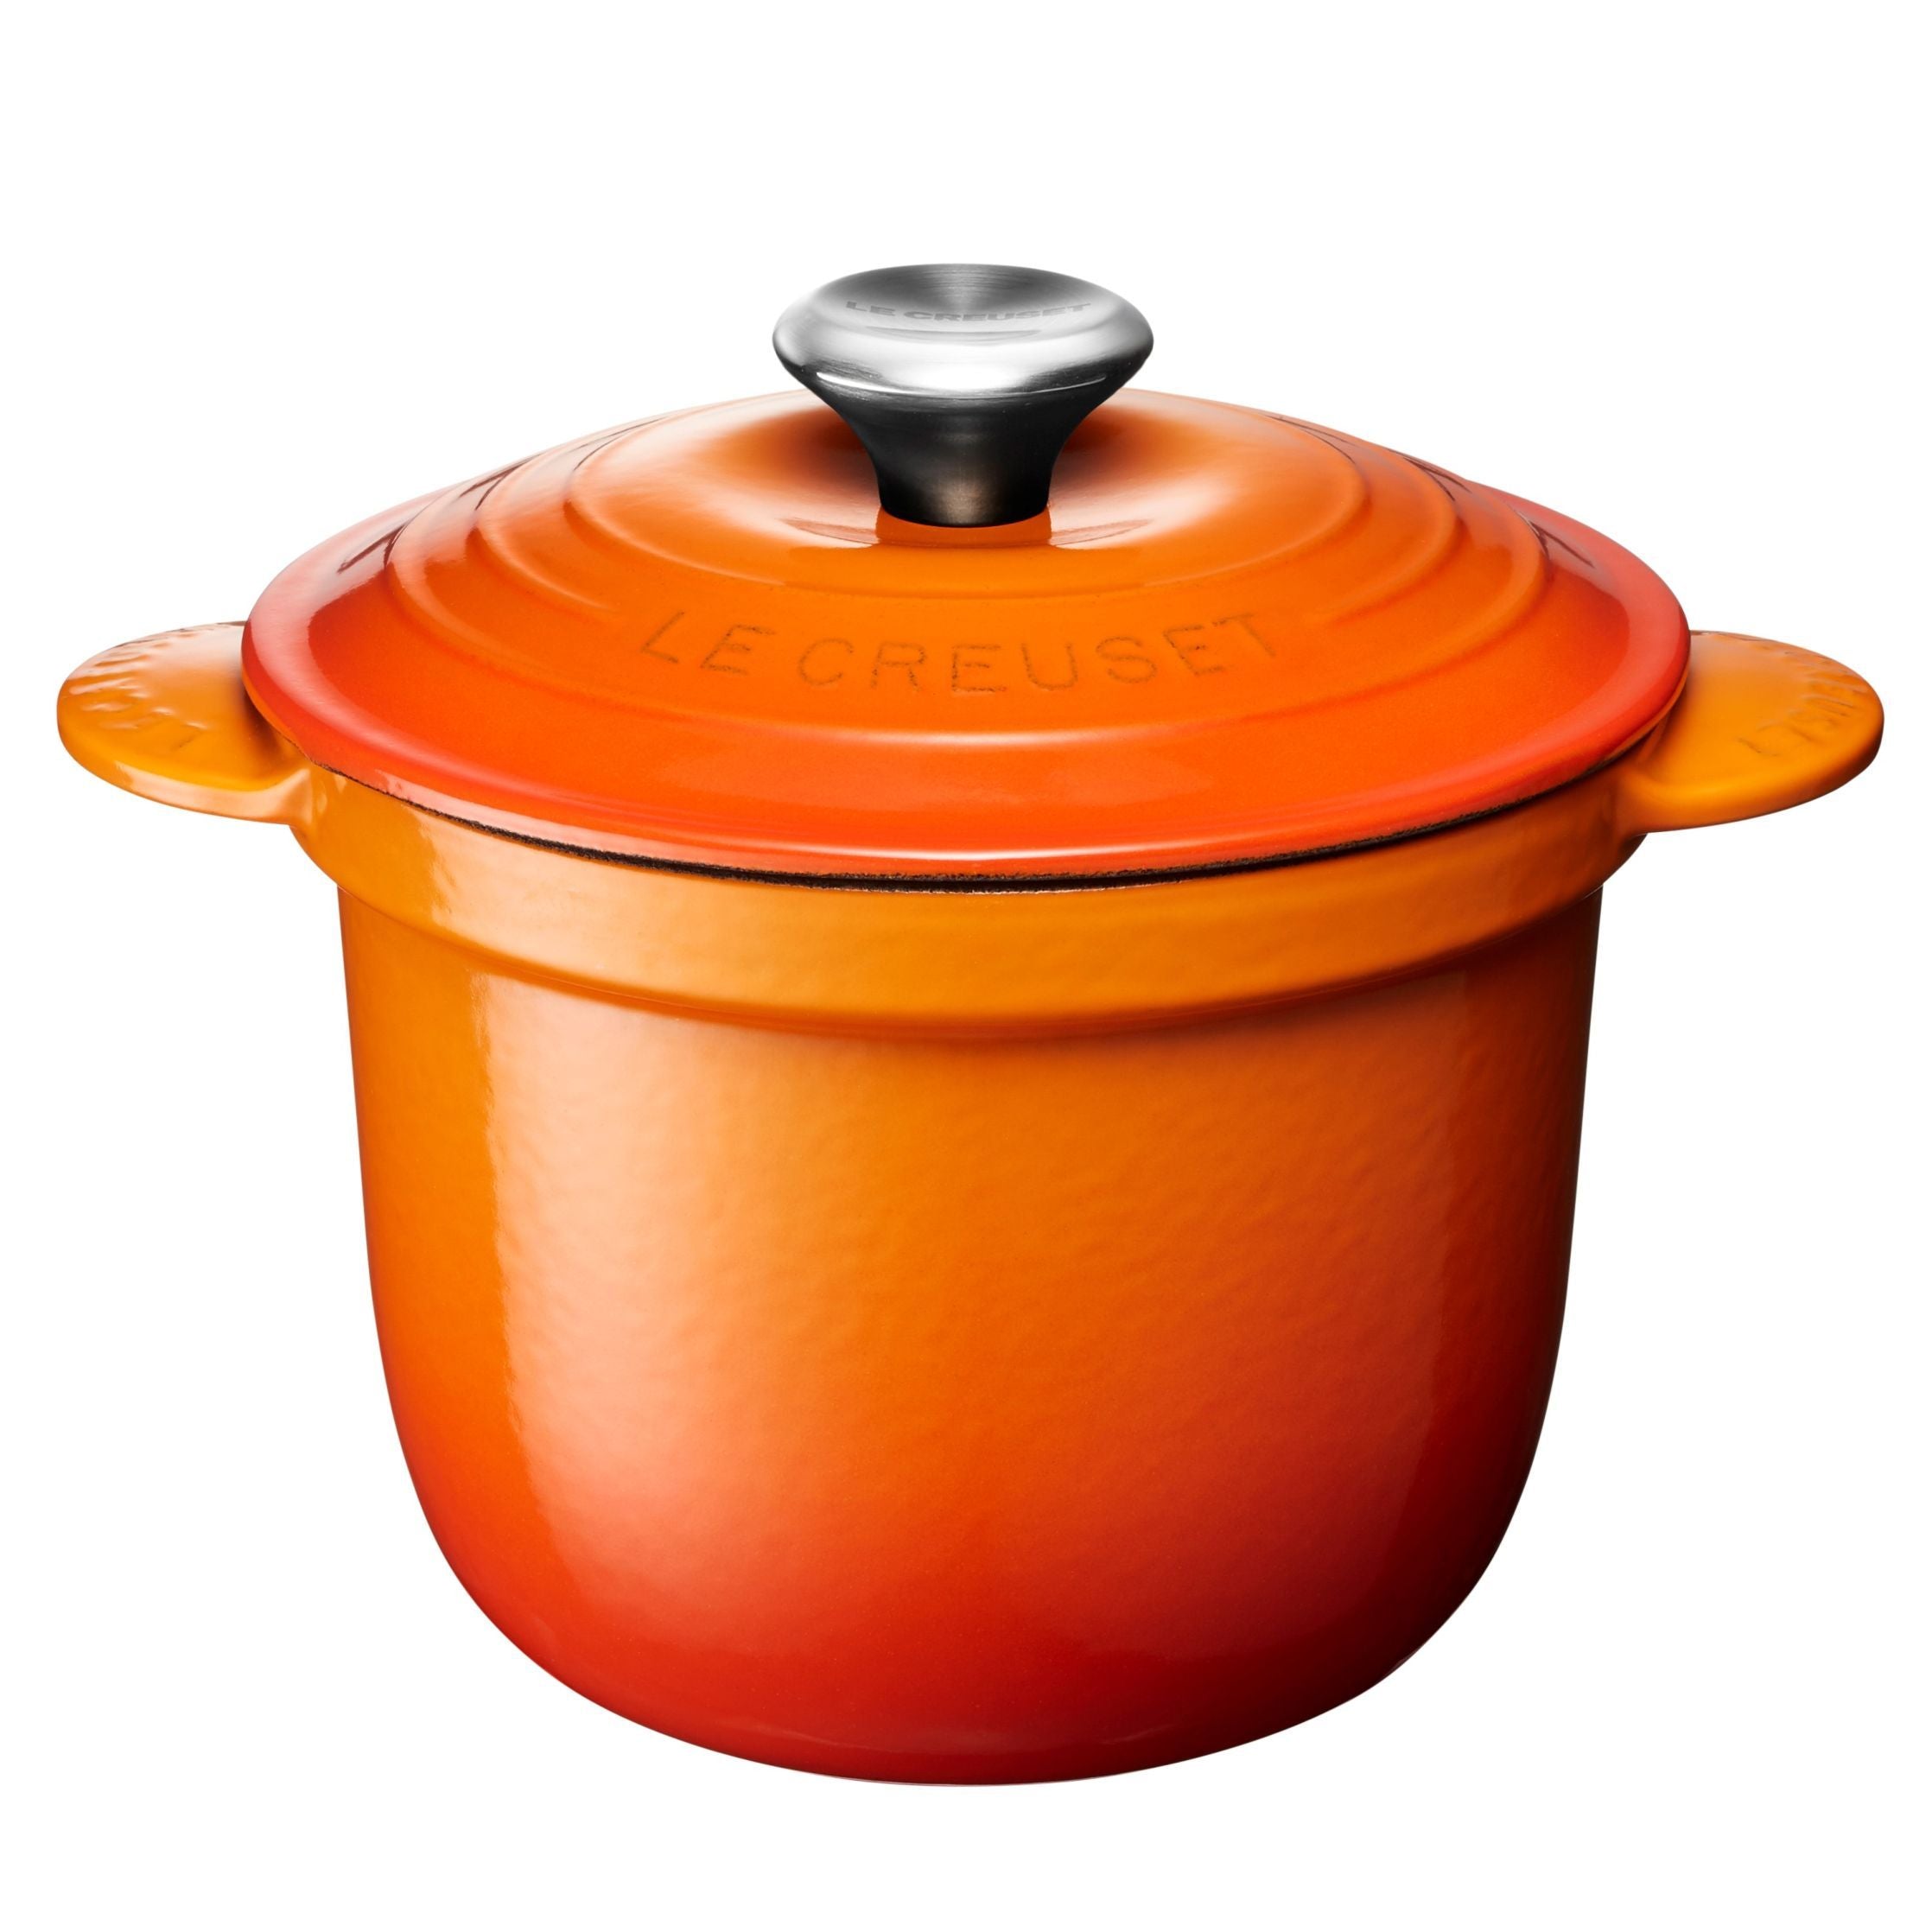 Le Creuset Cocotte，poteriedeckel 18厘米，烤箱红